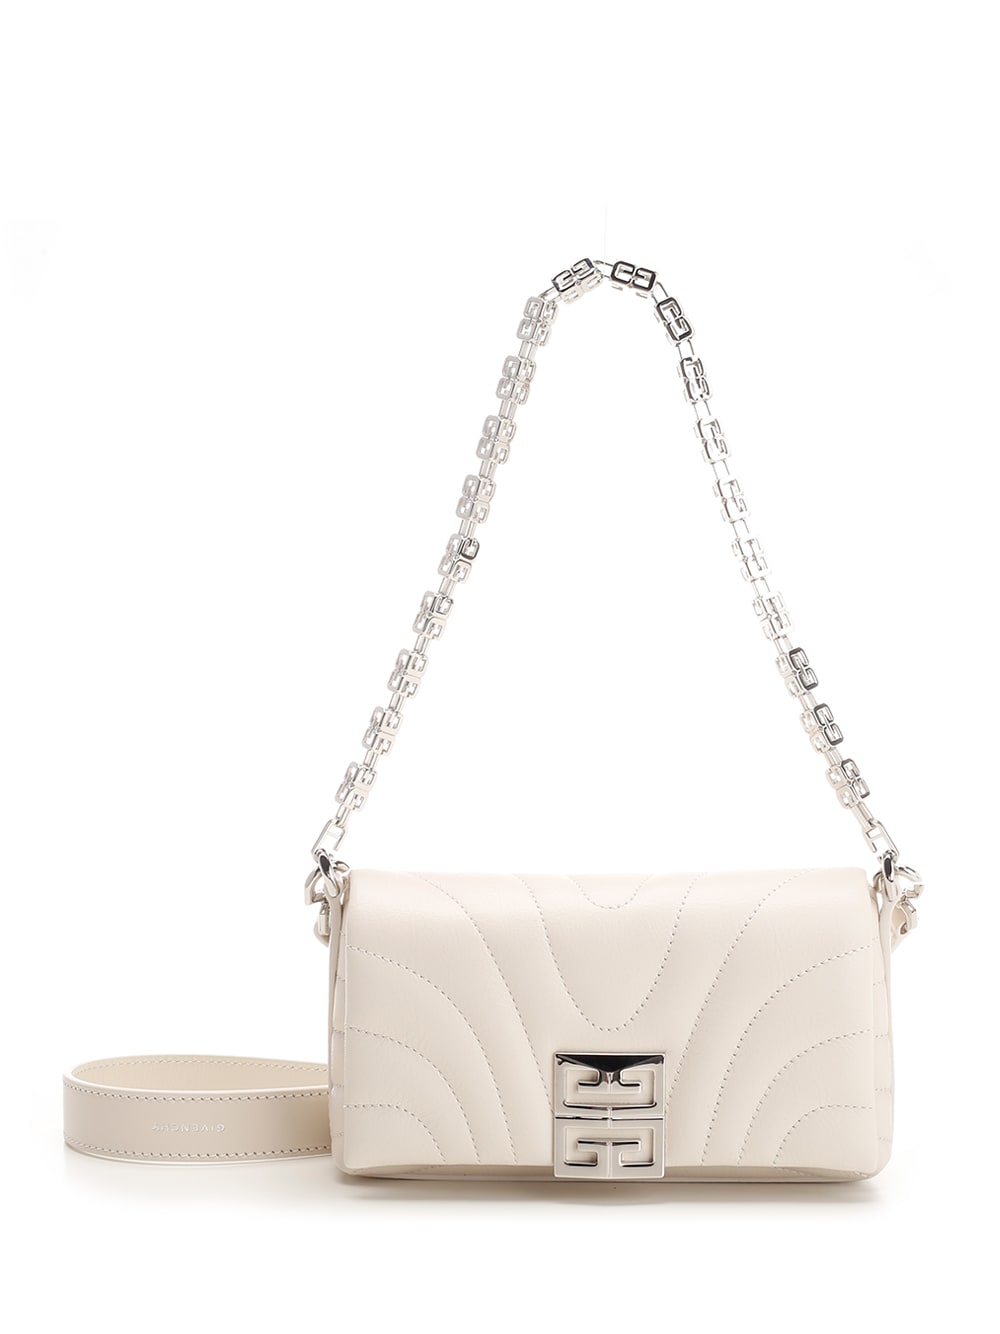 Givenchy 4g Soft Small Shoulder Bag In White